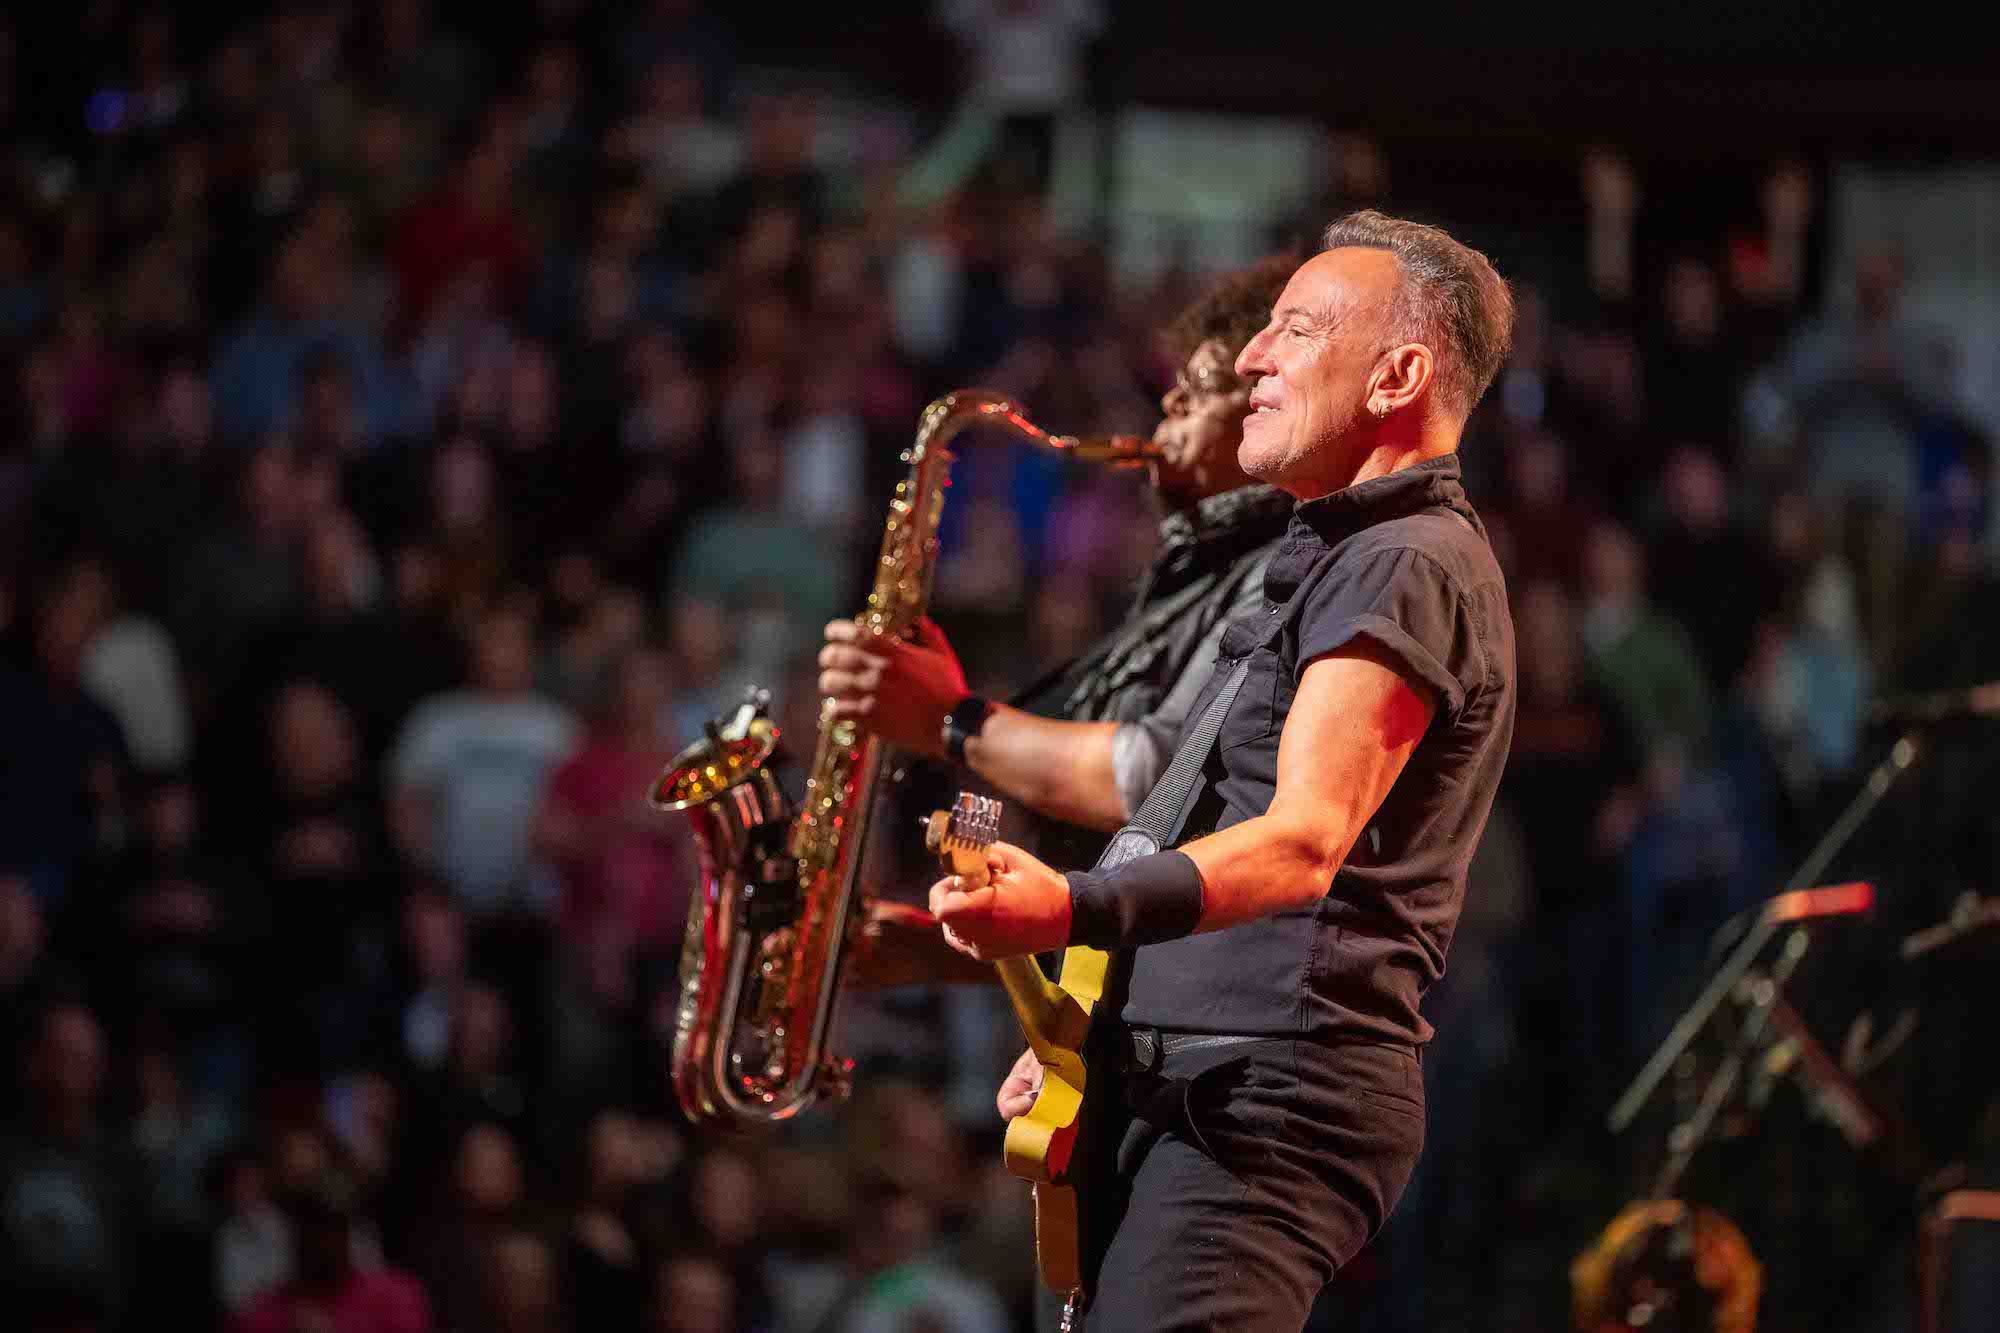 Bruce Springsteen & E Street Band at American Airlines Center, Dallas, Texas on February 10, 2023.